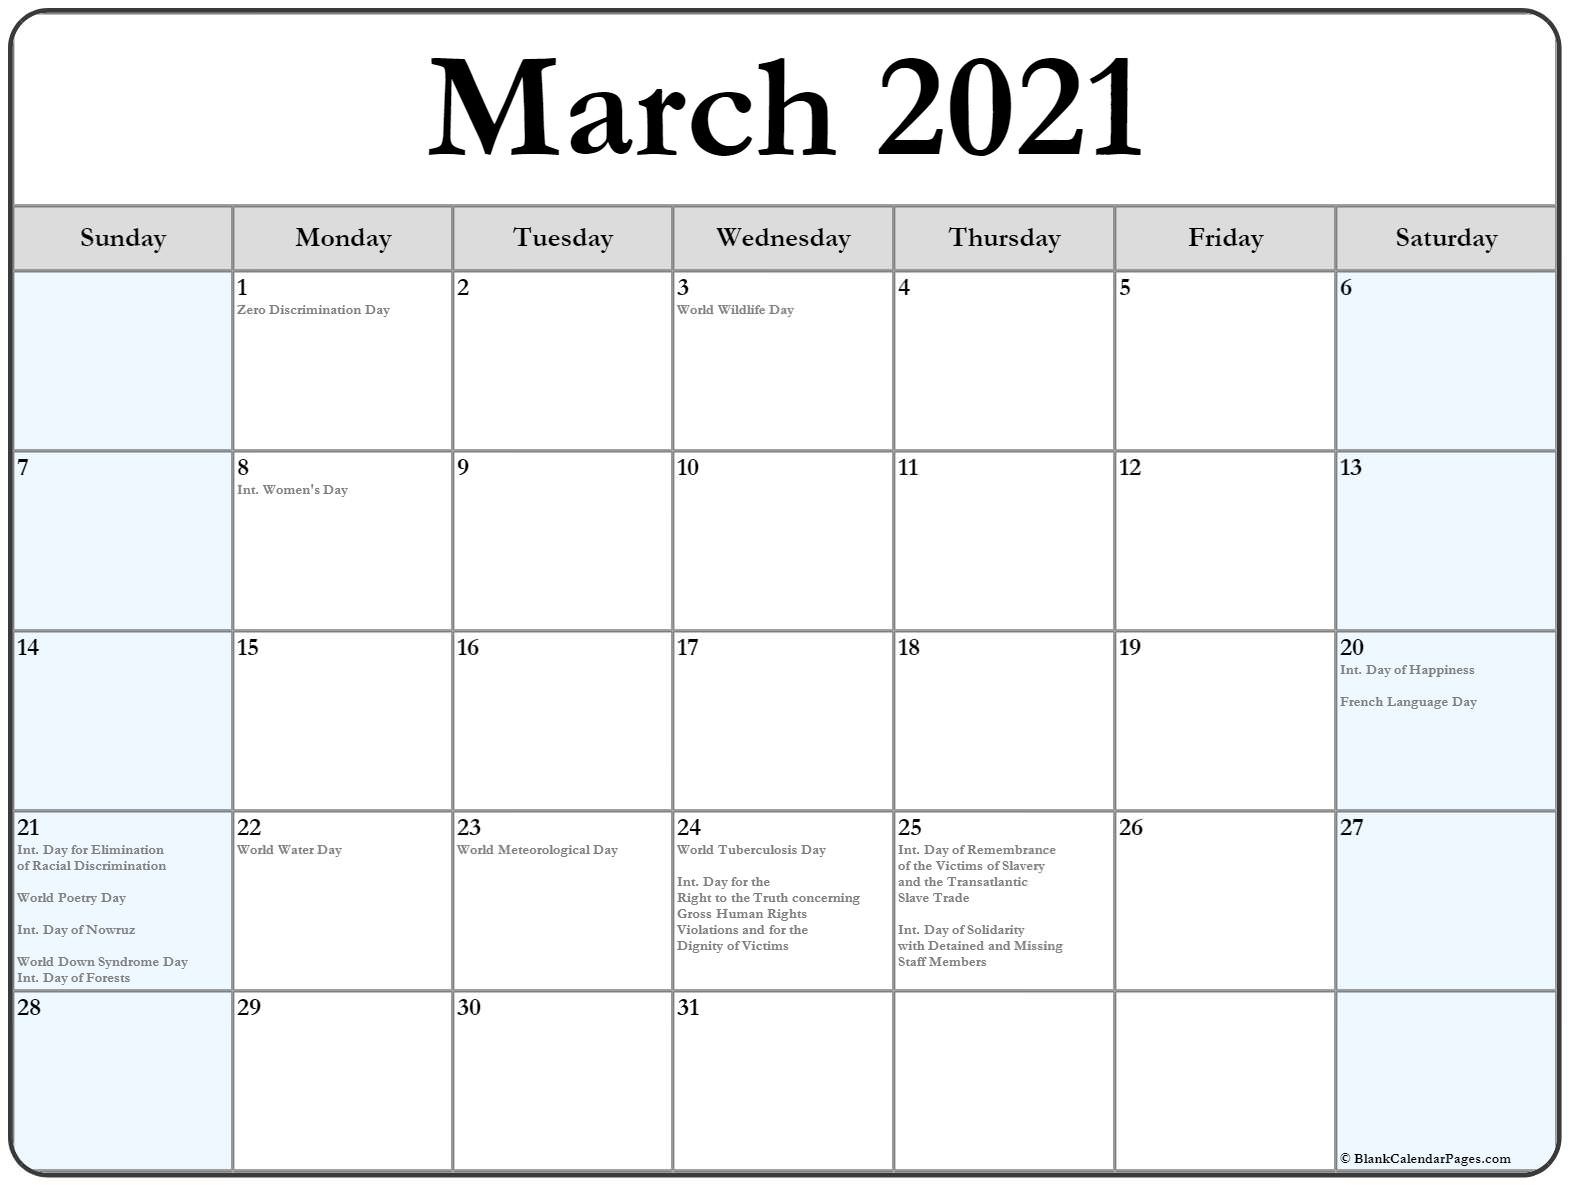 March 2021 Weekly Calendar Collection Of March 2021 Calendars with Holidays